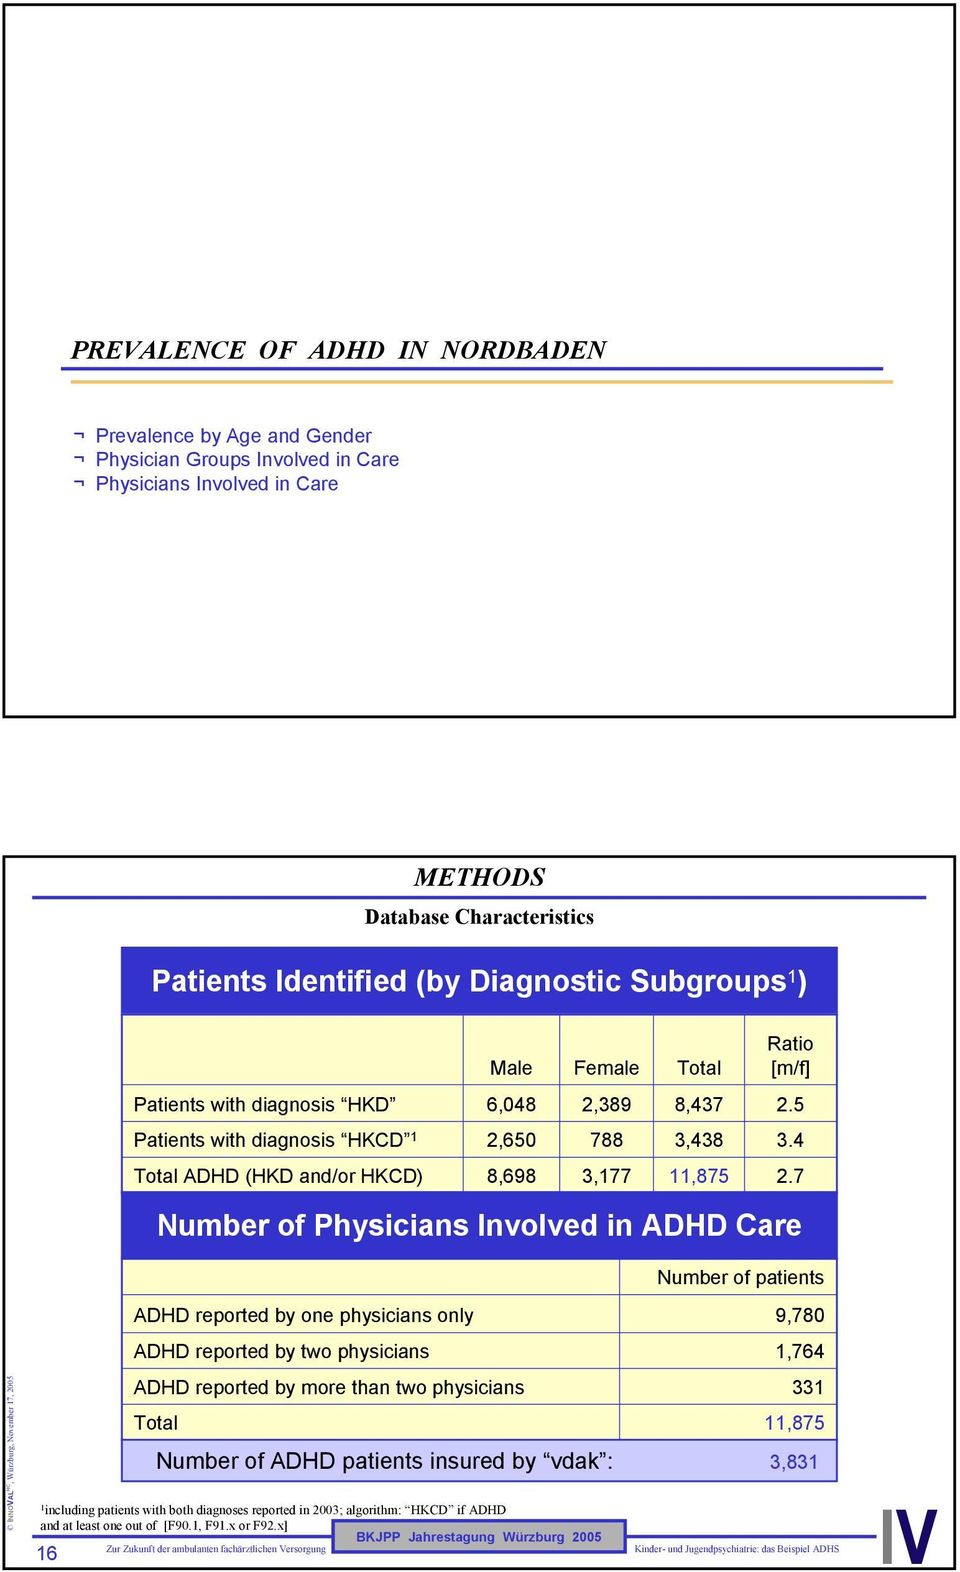 4 Total ADHD (HKD and/or HKCD) Male 8,698 Female 3,177 Total 11,875 Ratio [m/f] Number of Physicians Involved in ADHD Care 2.